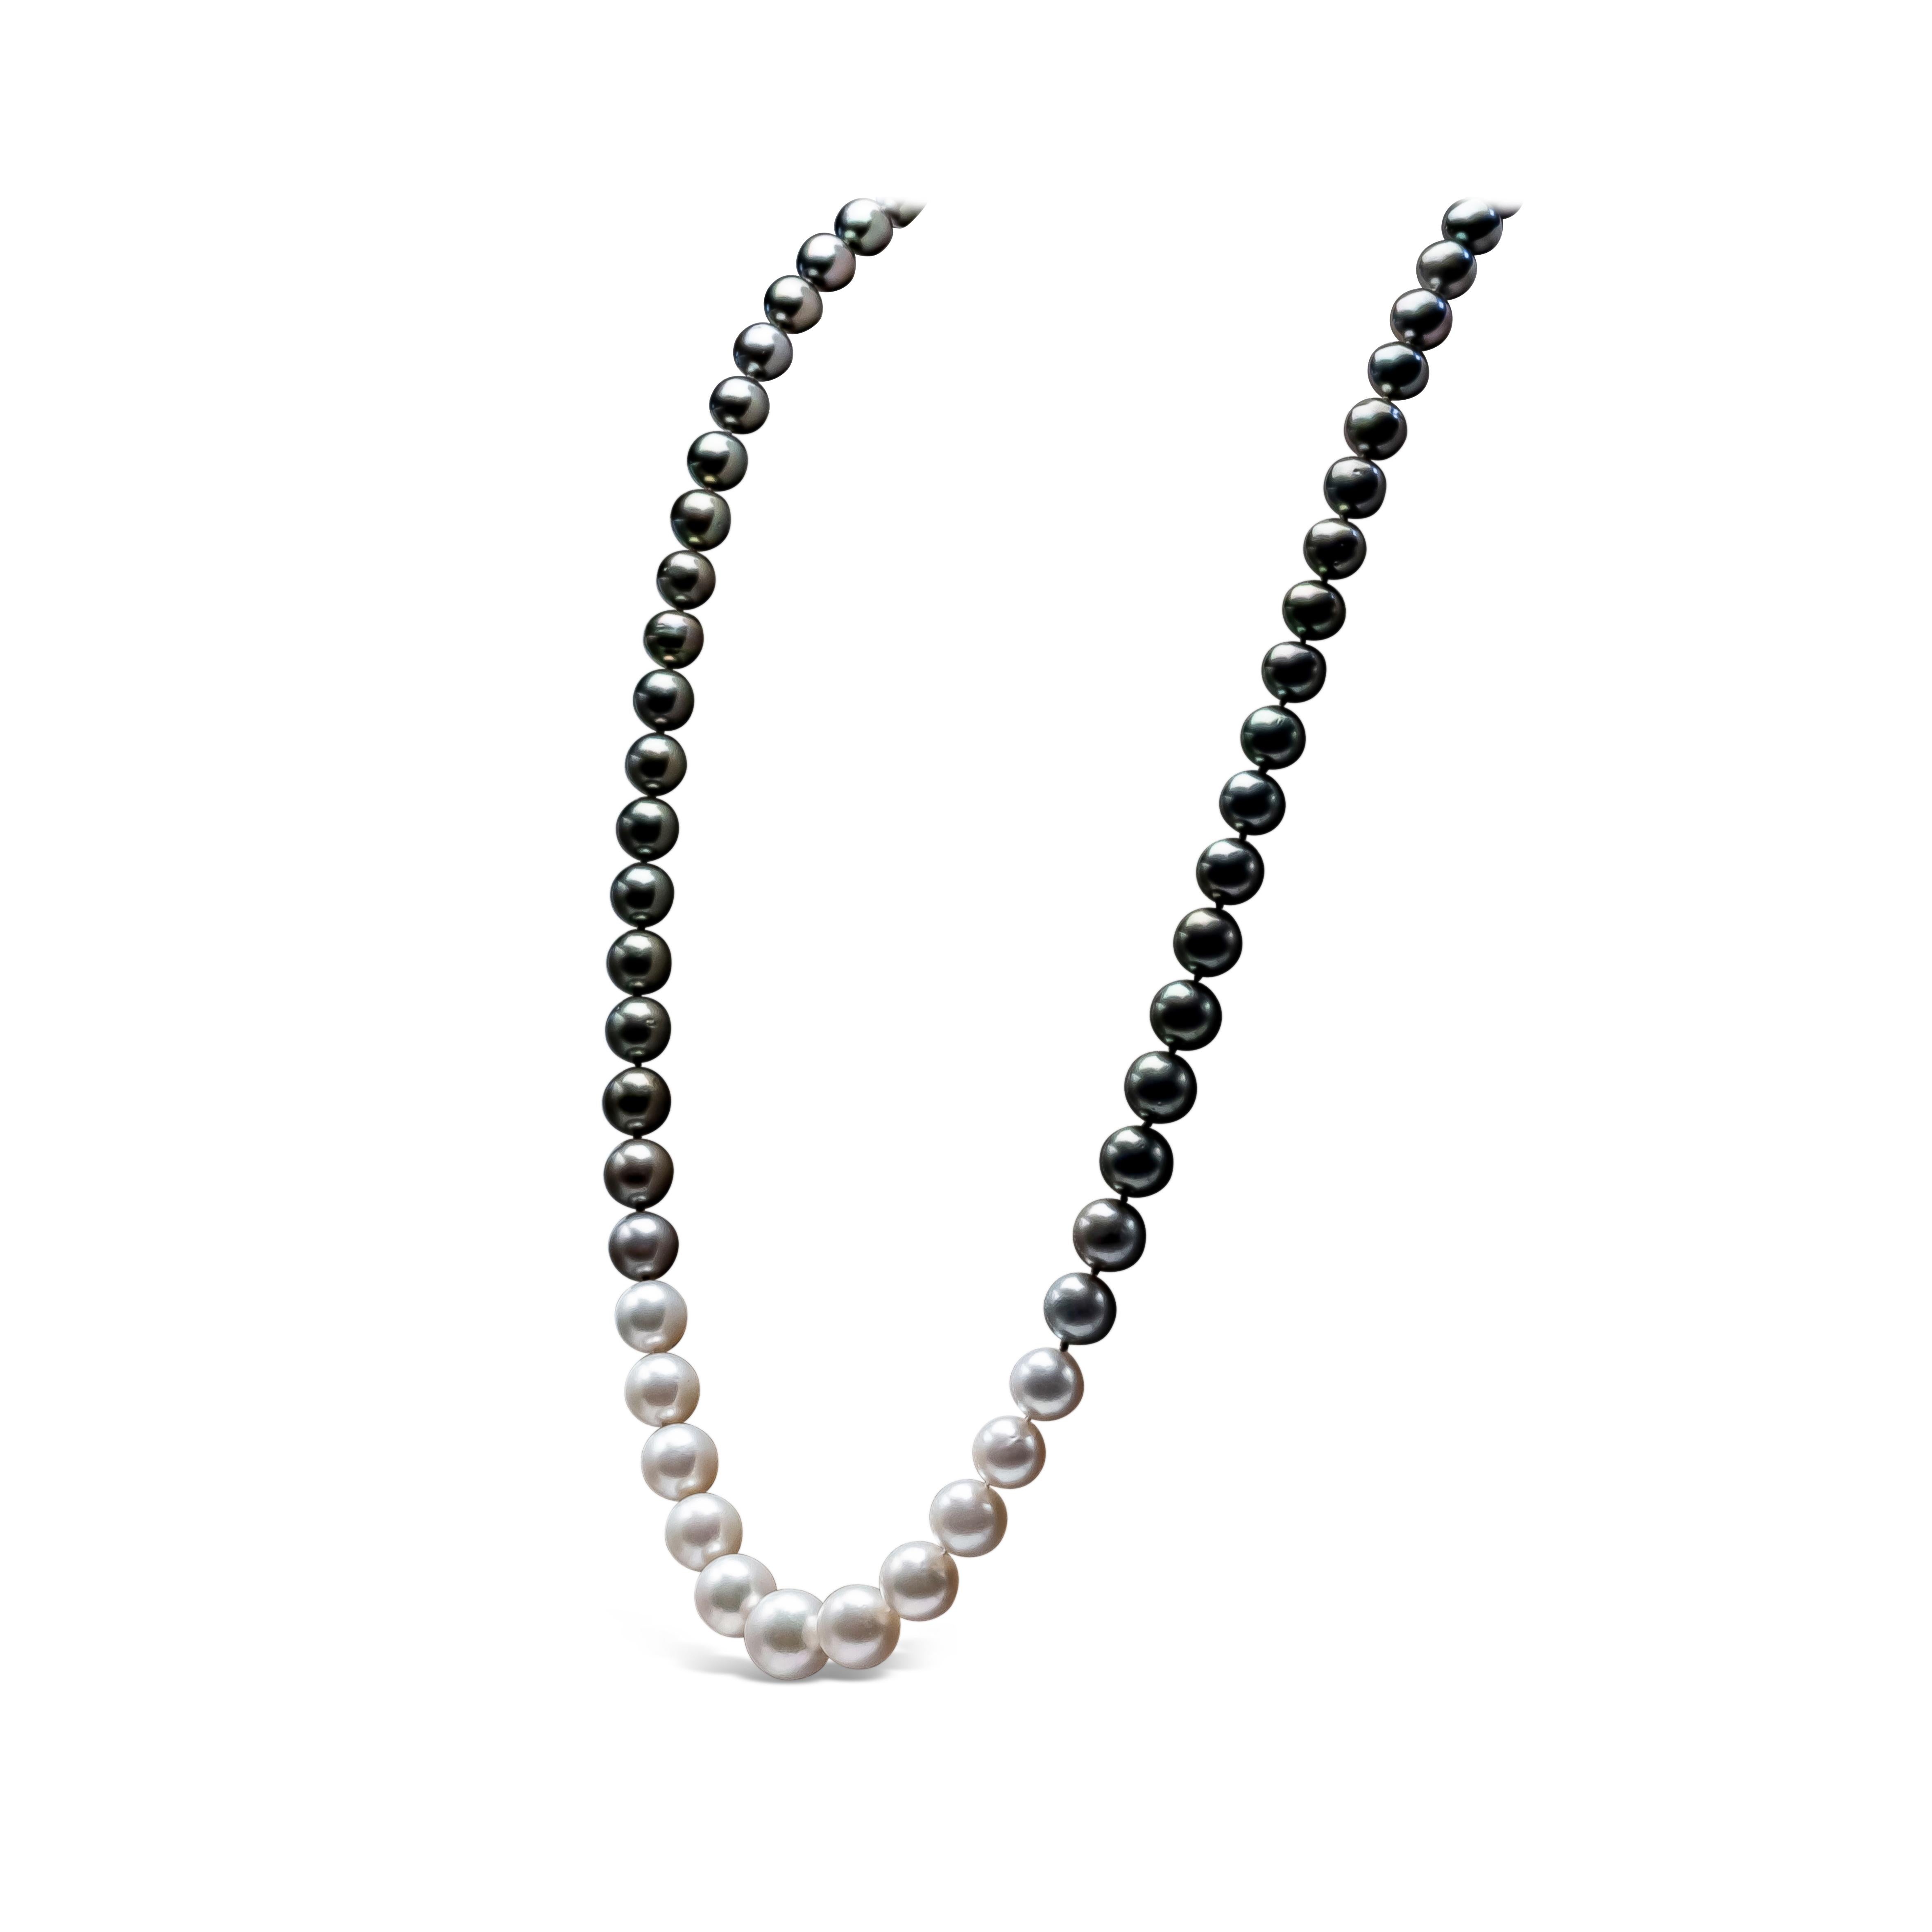 A very versatile necklace showcasing 11-16.7 mm white and black south sea pearls. This necklace has 83 pieces of south sea pearls designed in a classic opera length style and accented with a magnificent color transition of black pearls to white